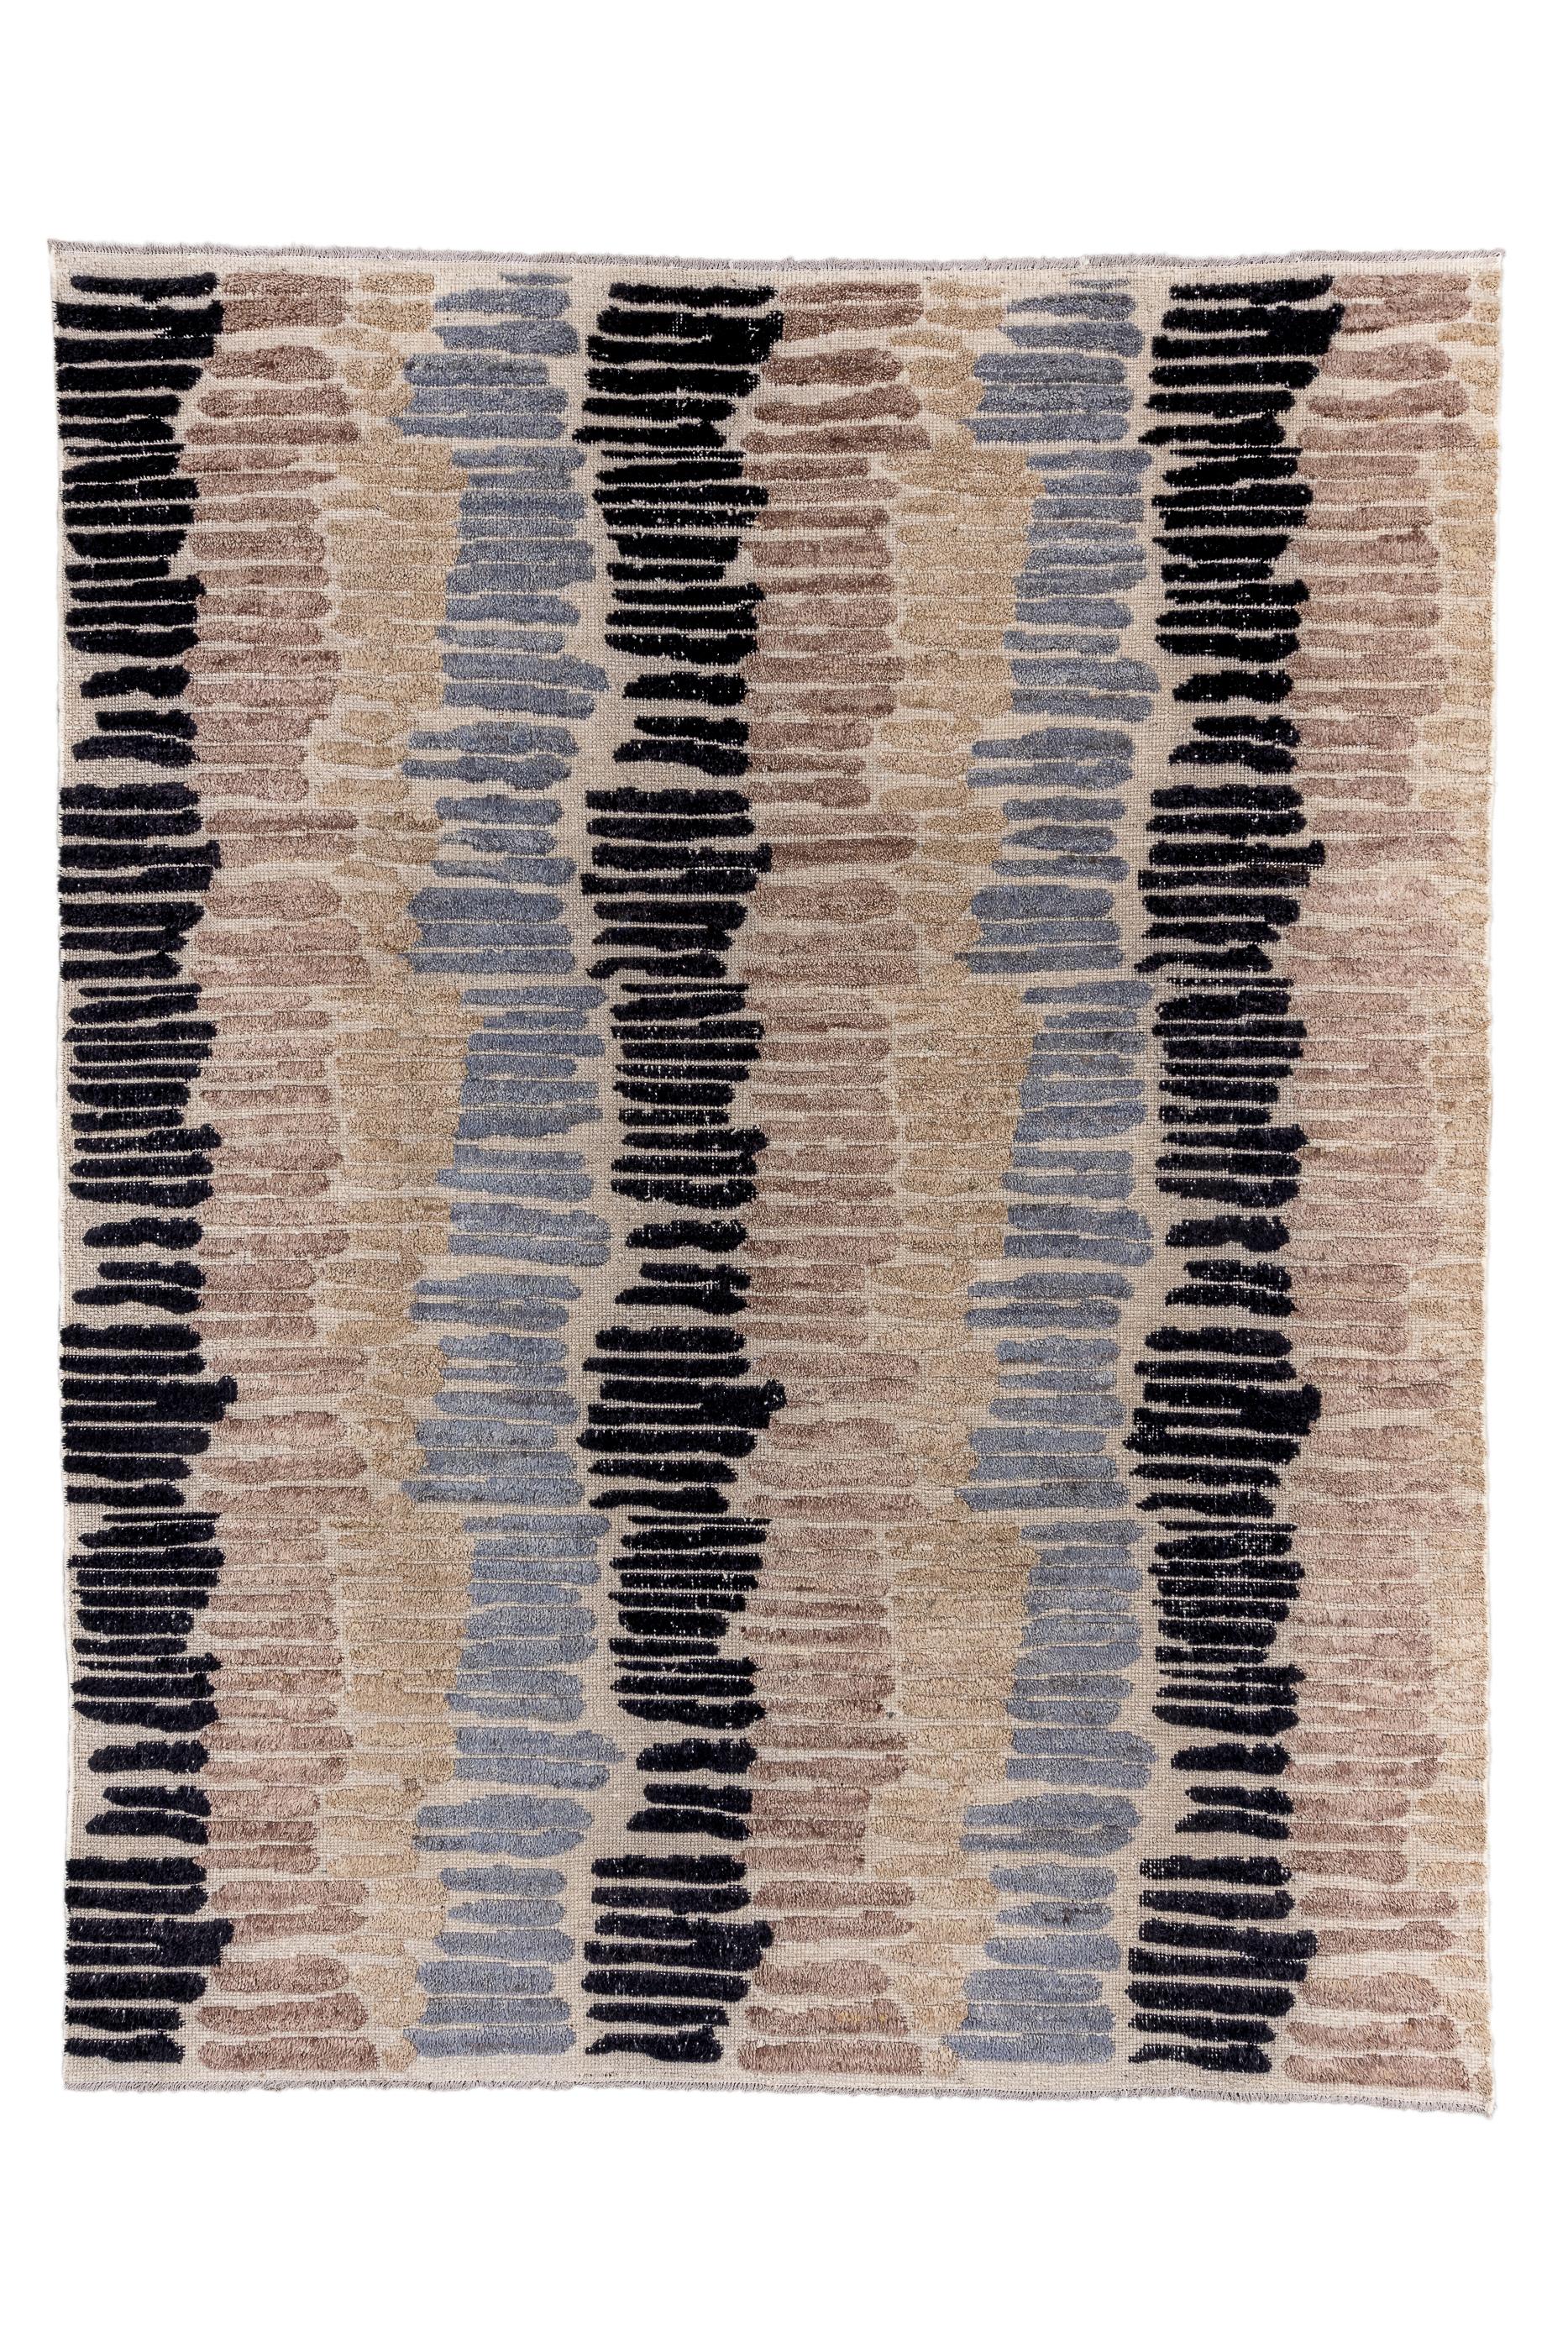 This unusual Anatolian rustic, long pile carpet, shows a columnar, brushstroke pattern in shades of charcoal, light blue and teal, on the well-covered ecru ground. The brushstroke horizontals repeat three times vertically, but the pattern is in no